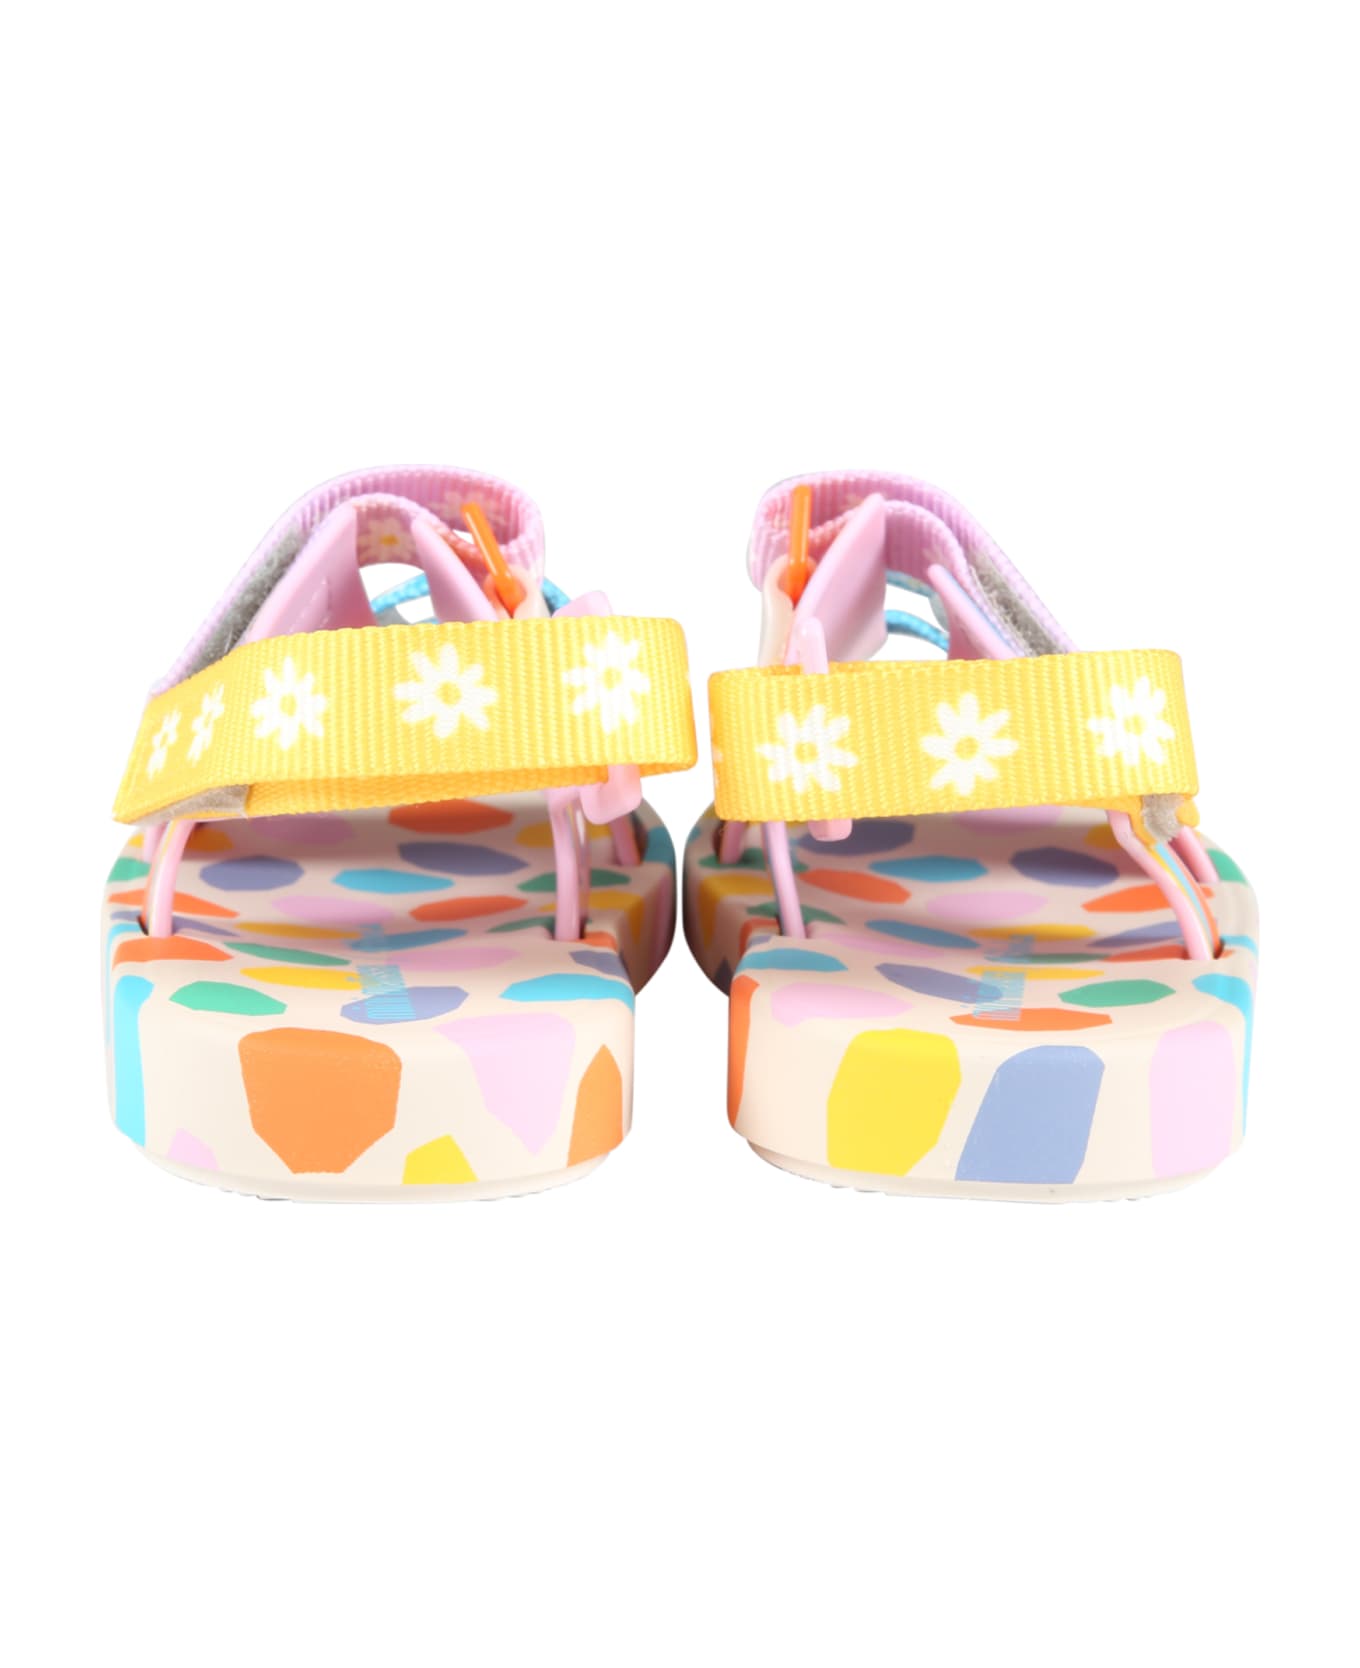 Melissa Multicolor Sandals For Kids With Prints - Multicolor